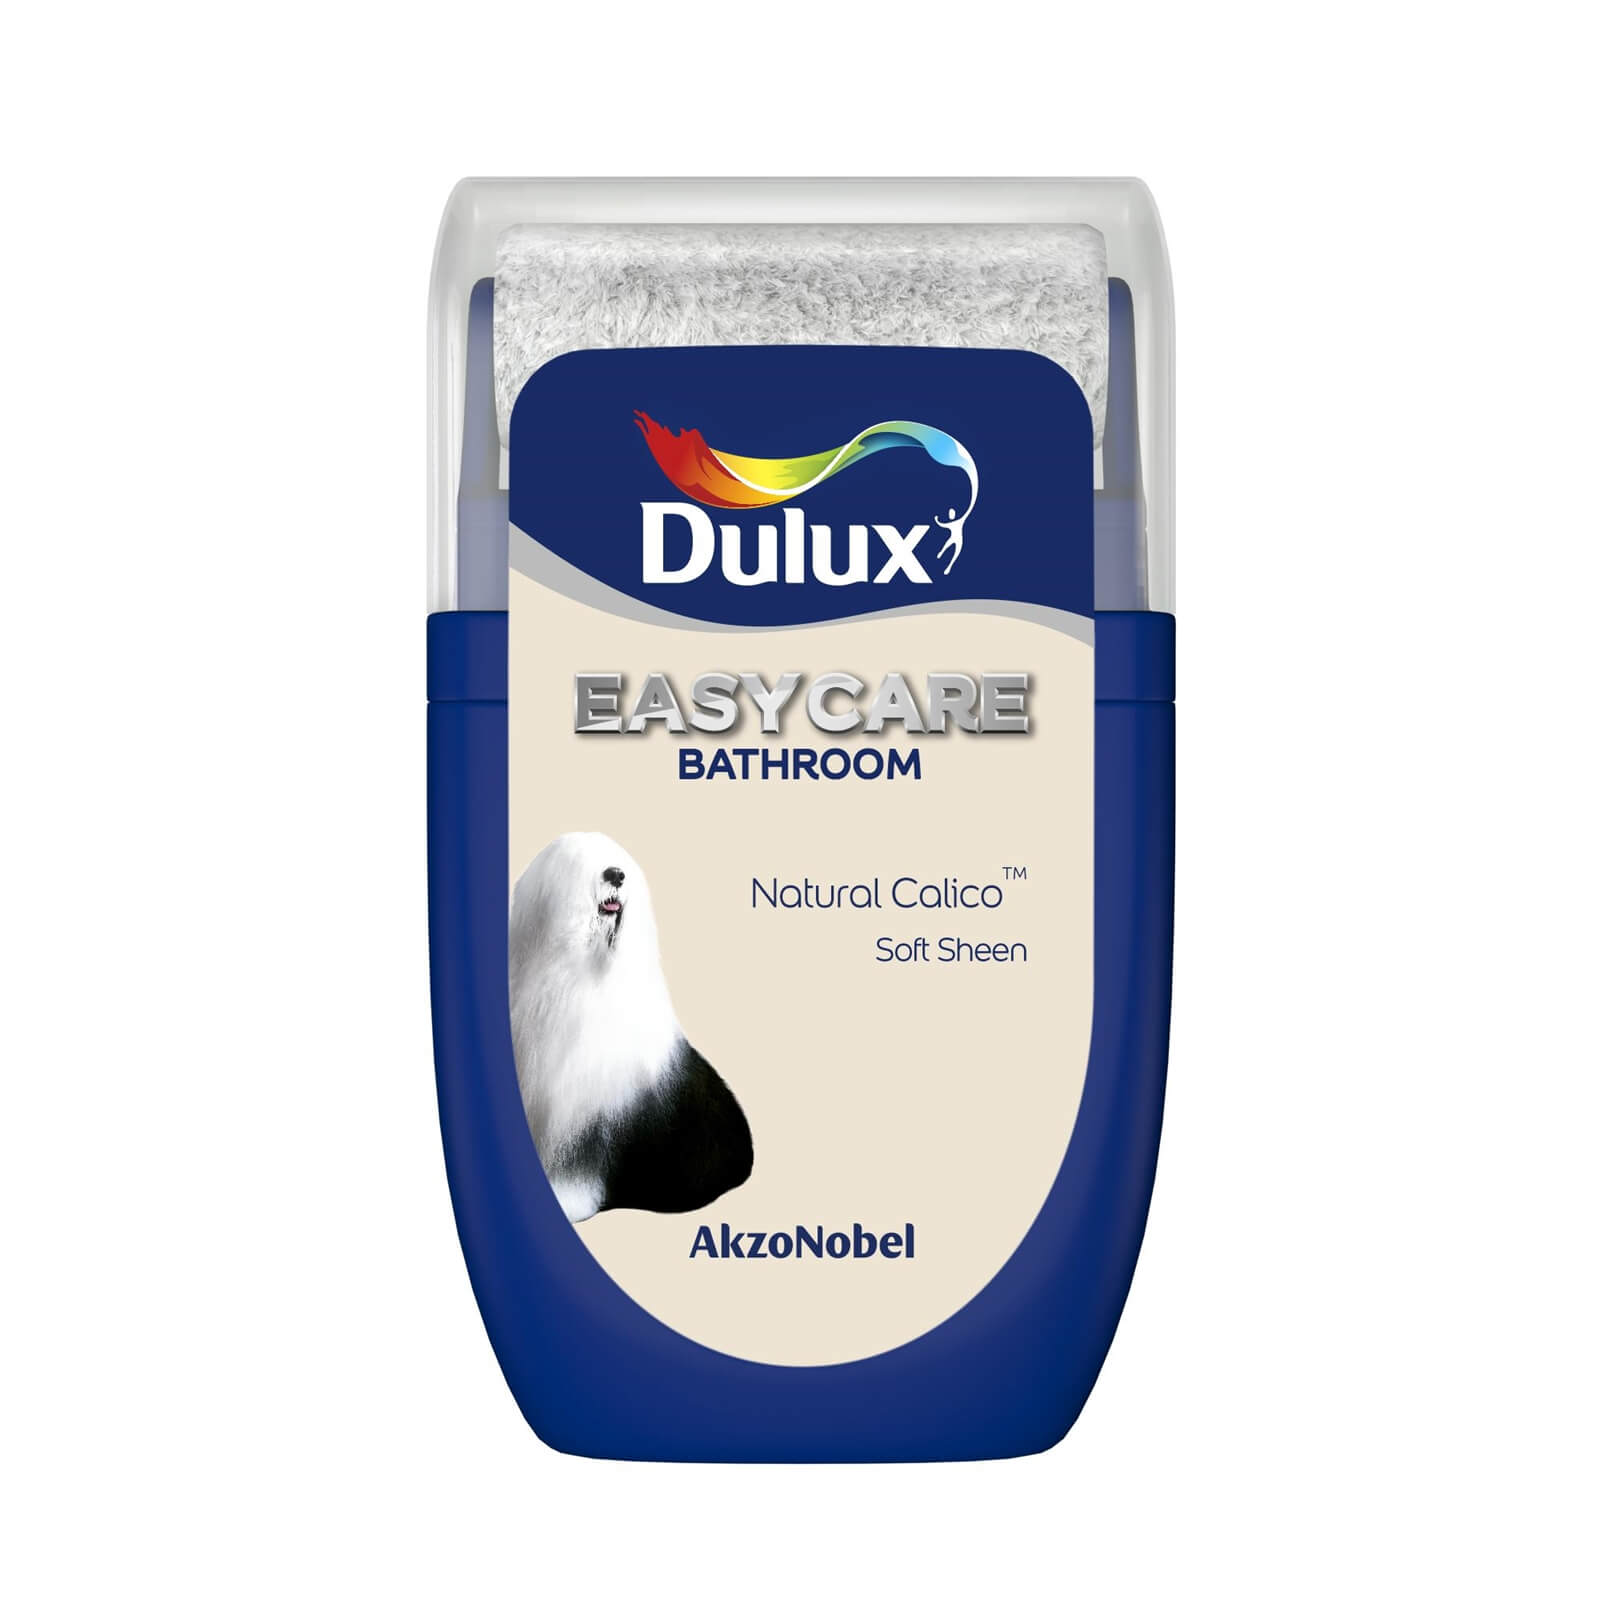 Dulux Easycare Bathroom Natural Calico Tester Paint - 30ml